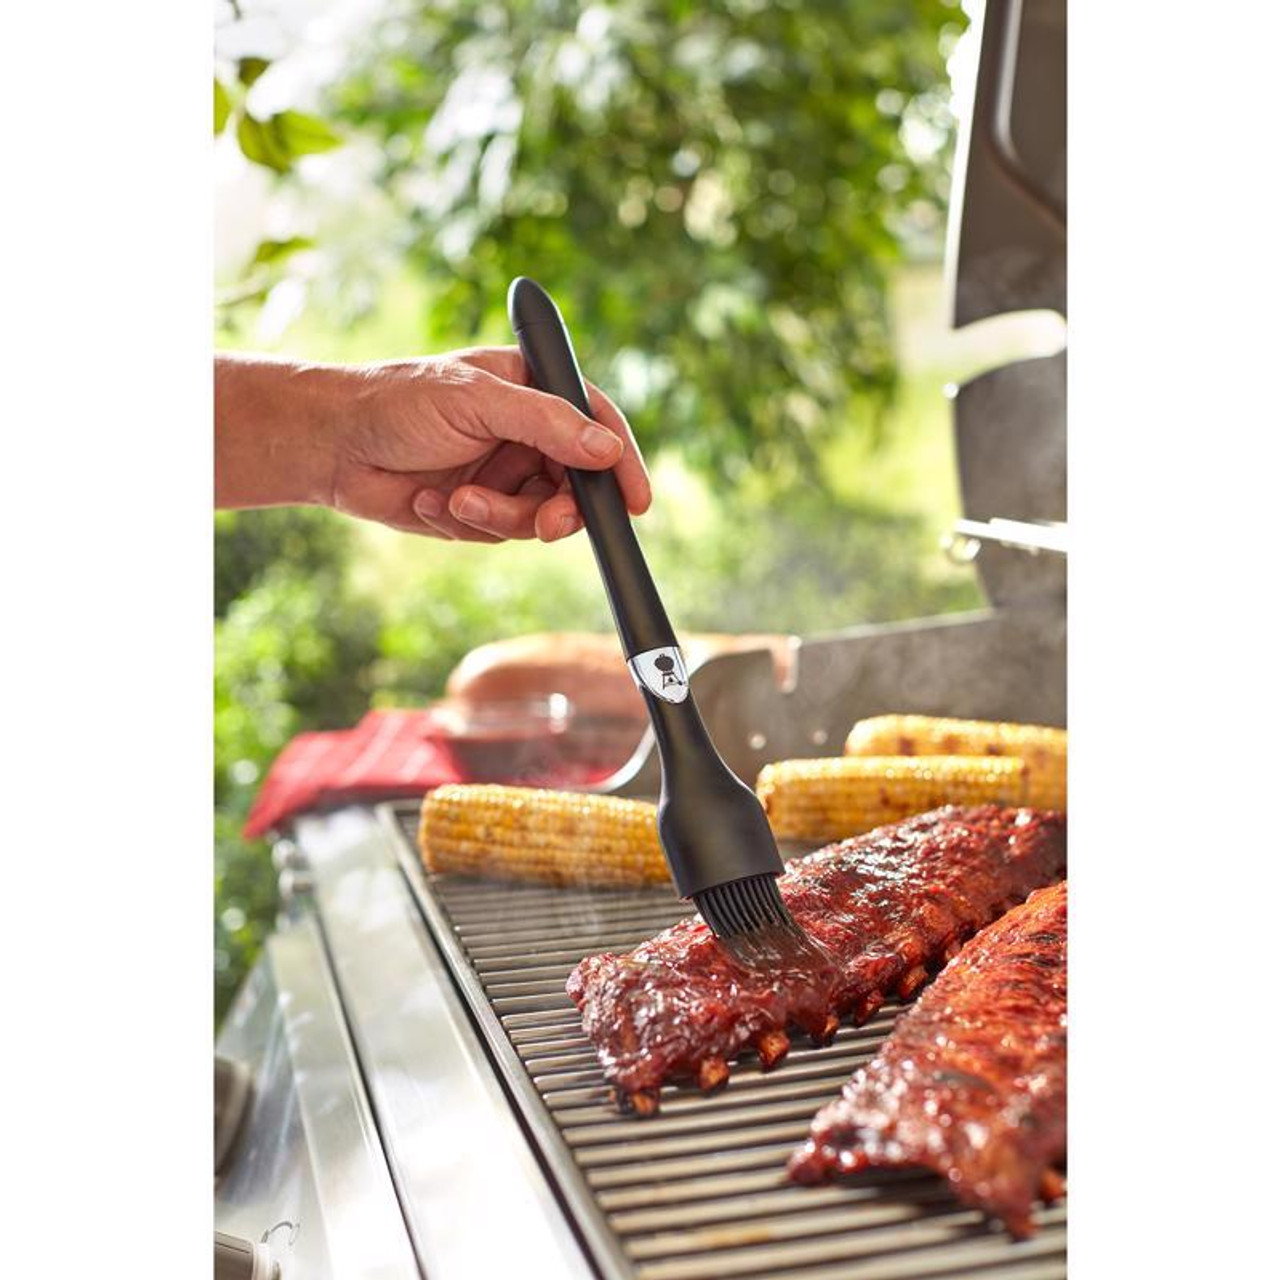 55005 by Napoleon BBQ - Silicone Basting Brush with Stainless Steel Handle